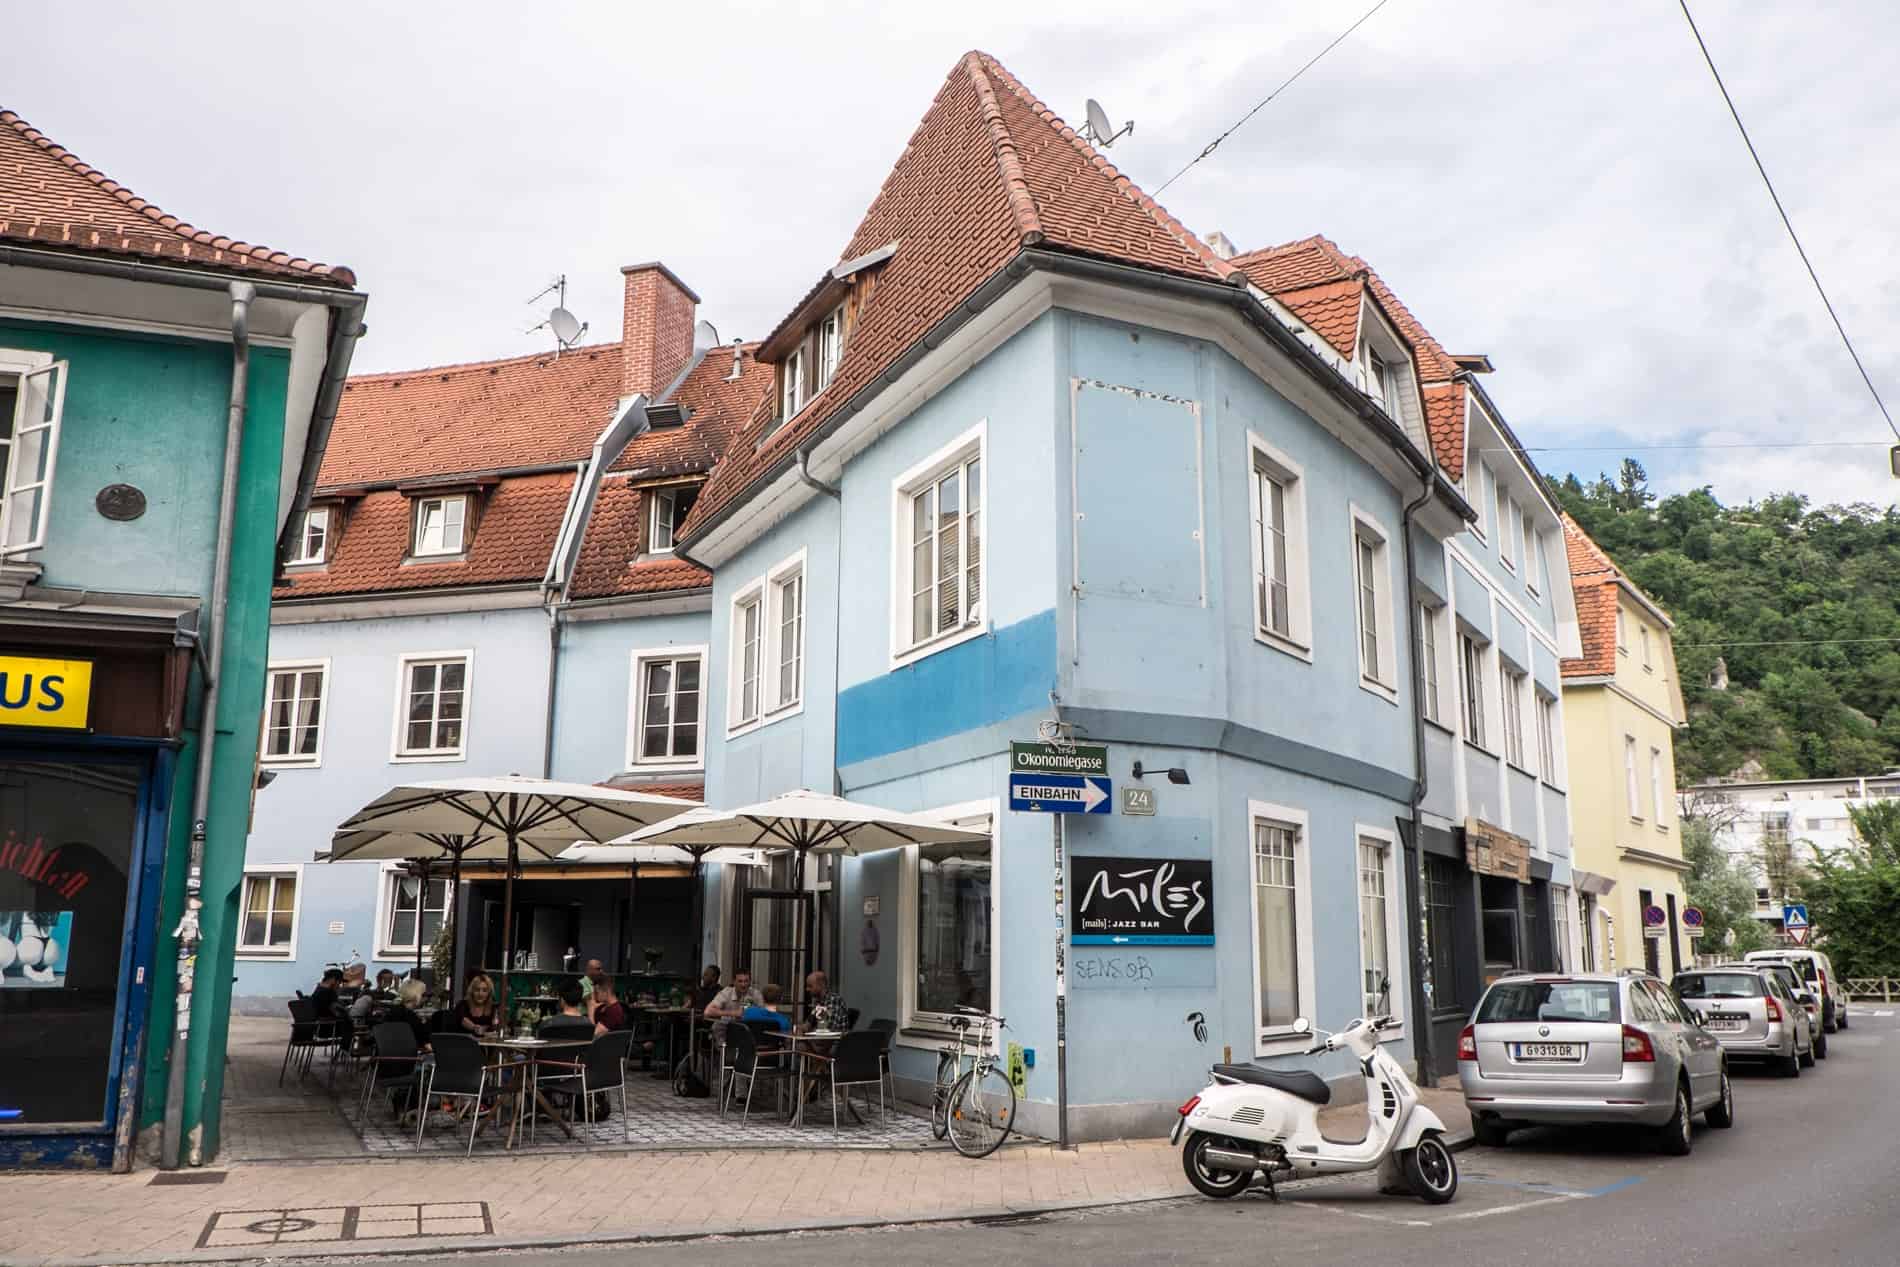 A former brother area building concealing a Jazz bar in the urbanised area of Graz.